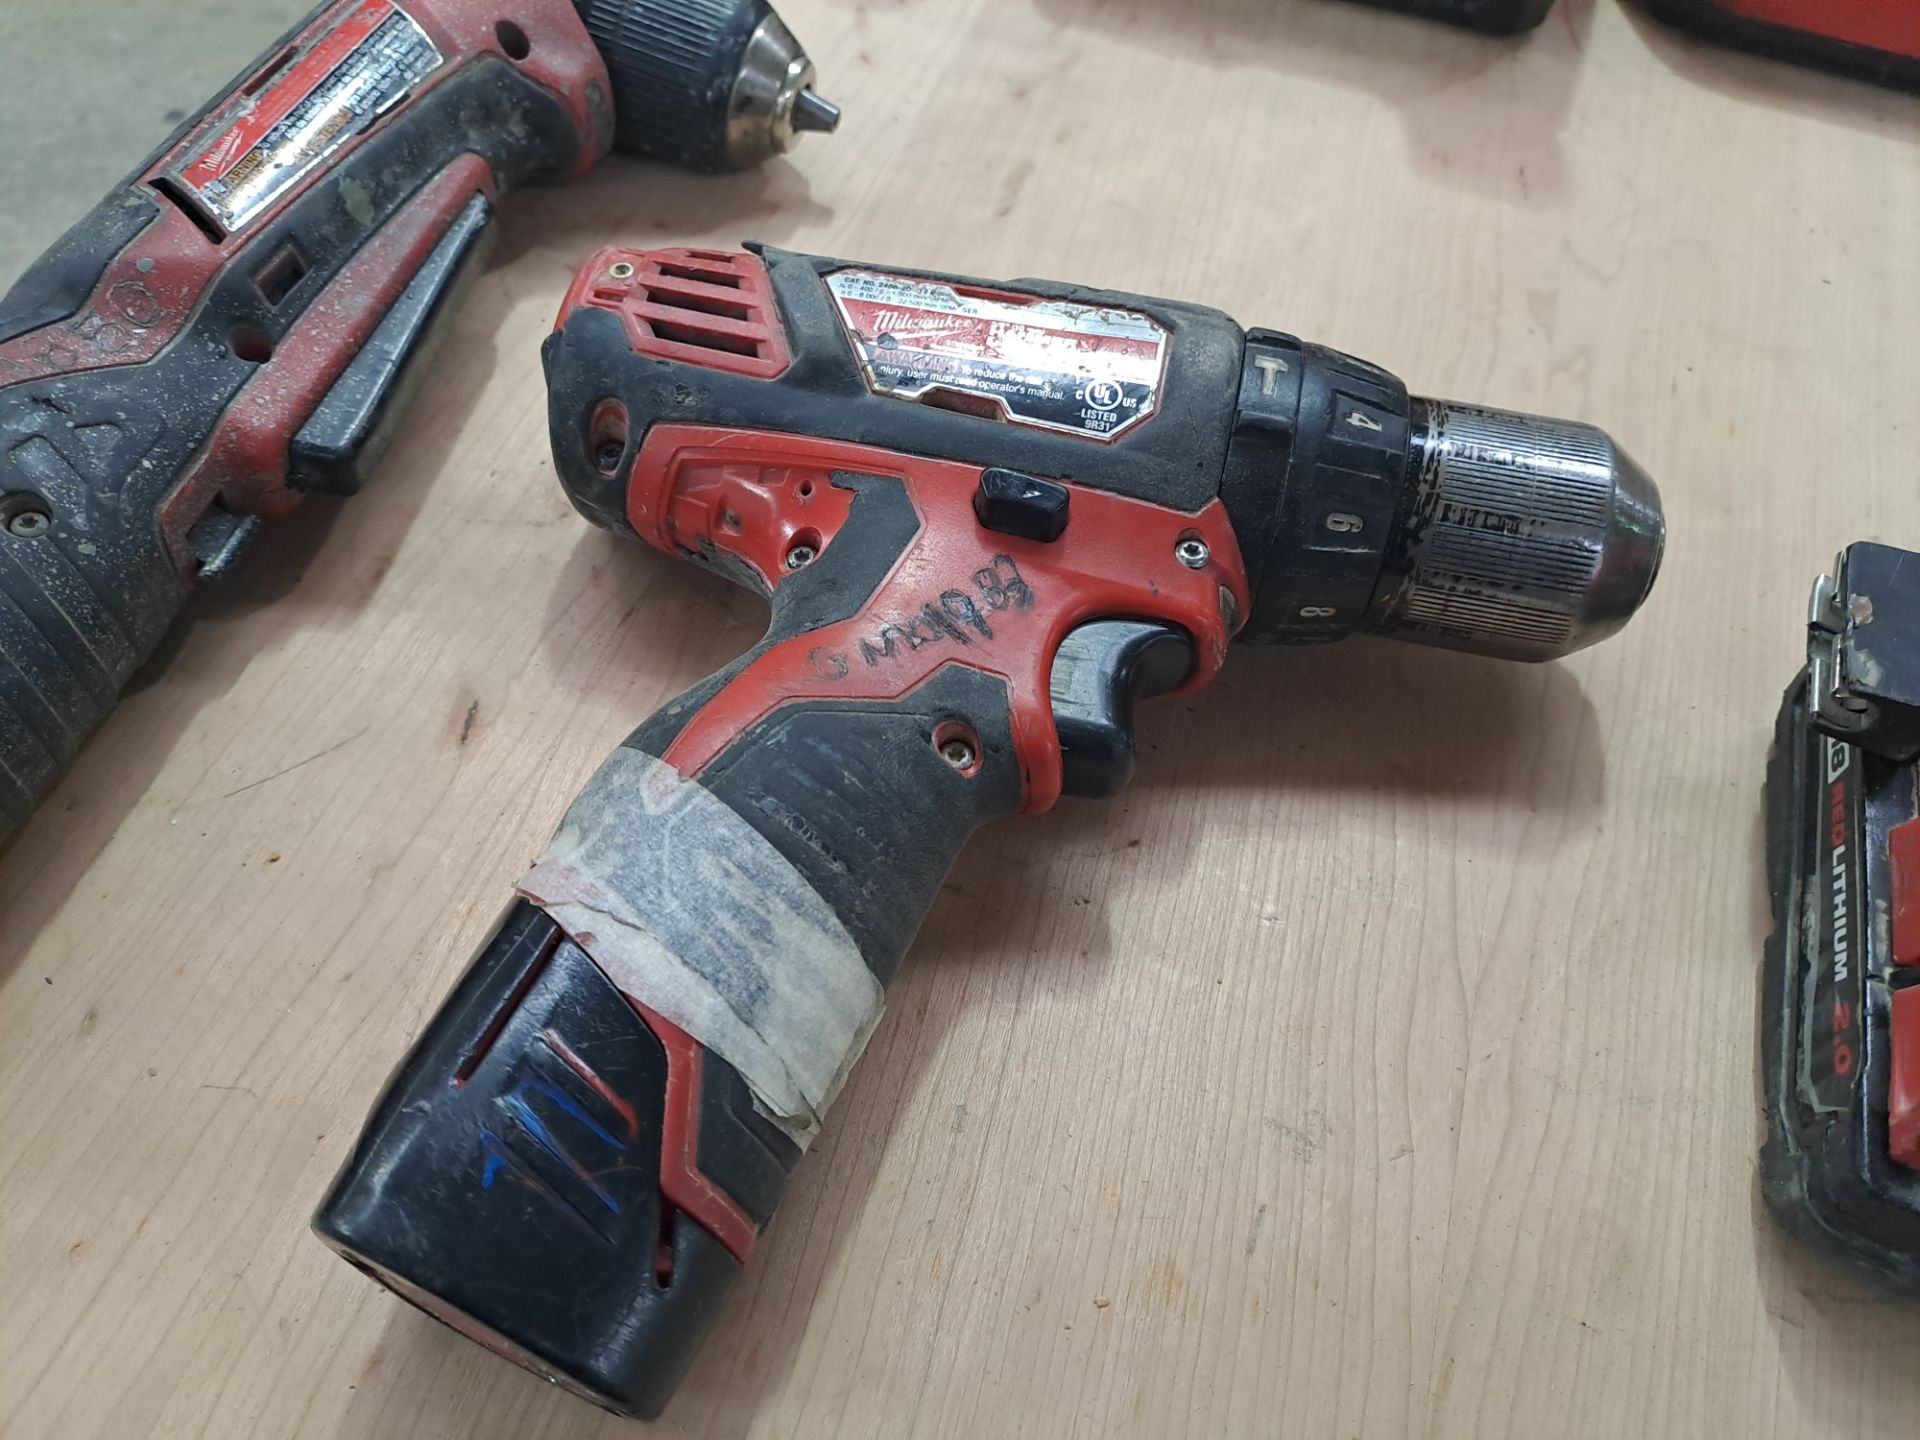 Lot of 4 pieces contains: 2 Milwaukee cordless drills (includes 2 chargers and 1 extra battery); 1 - Image 4 of 8